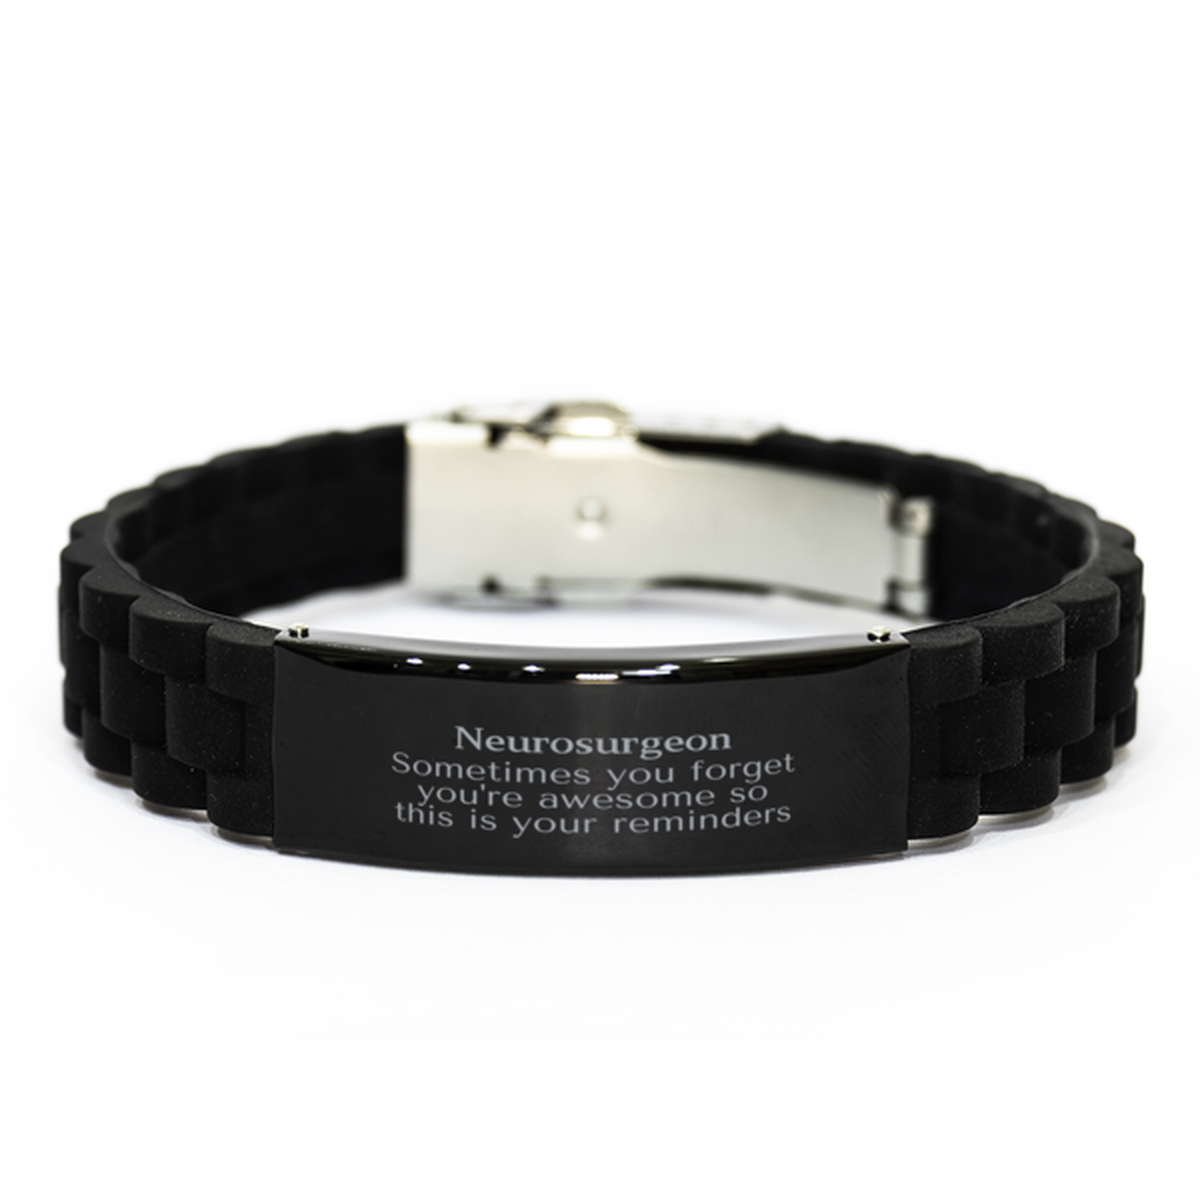 Sentimental Neurosurgeon Black Glidelock Clasp Bracelet, Neurosurgeon Sometimes you forget you're awesome so this is your reminders, Graduation Christmas Birthday Gifts for Neurosurgeon, Men, Women, Coworkers